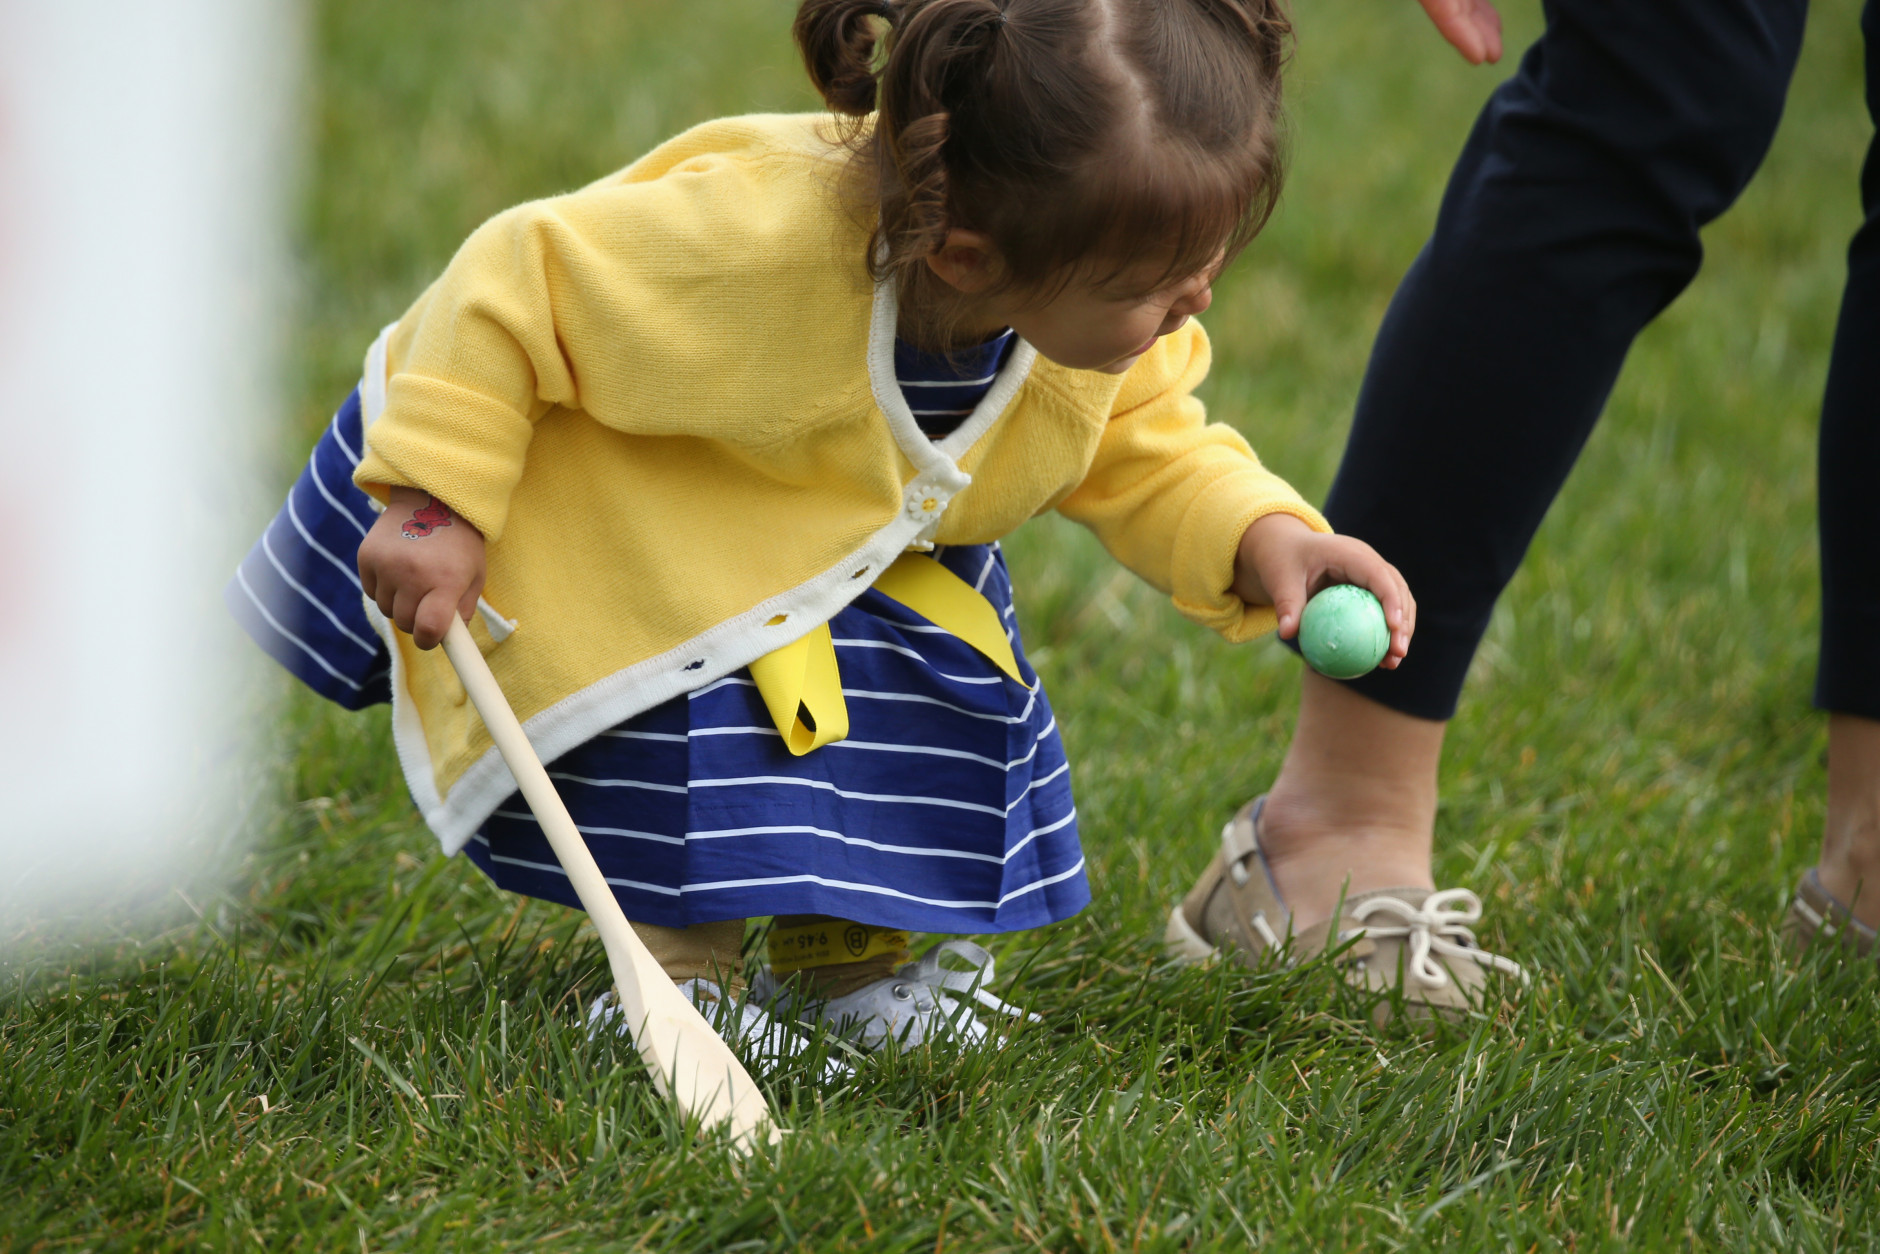 A child participates in the White House Easter Egg Roll on the South Lawn of the White House in Washington, Monday, March 28, 2016. Thousands of children gathered at the White House for the annual Easter Egg Roll. This year's event features  live music, sports courts, cooking stations, storytelling, and Easter egg rolling.